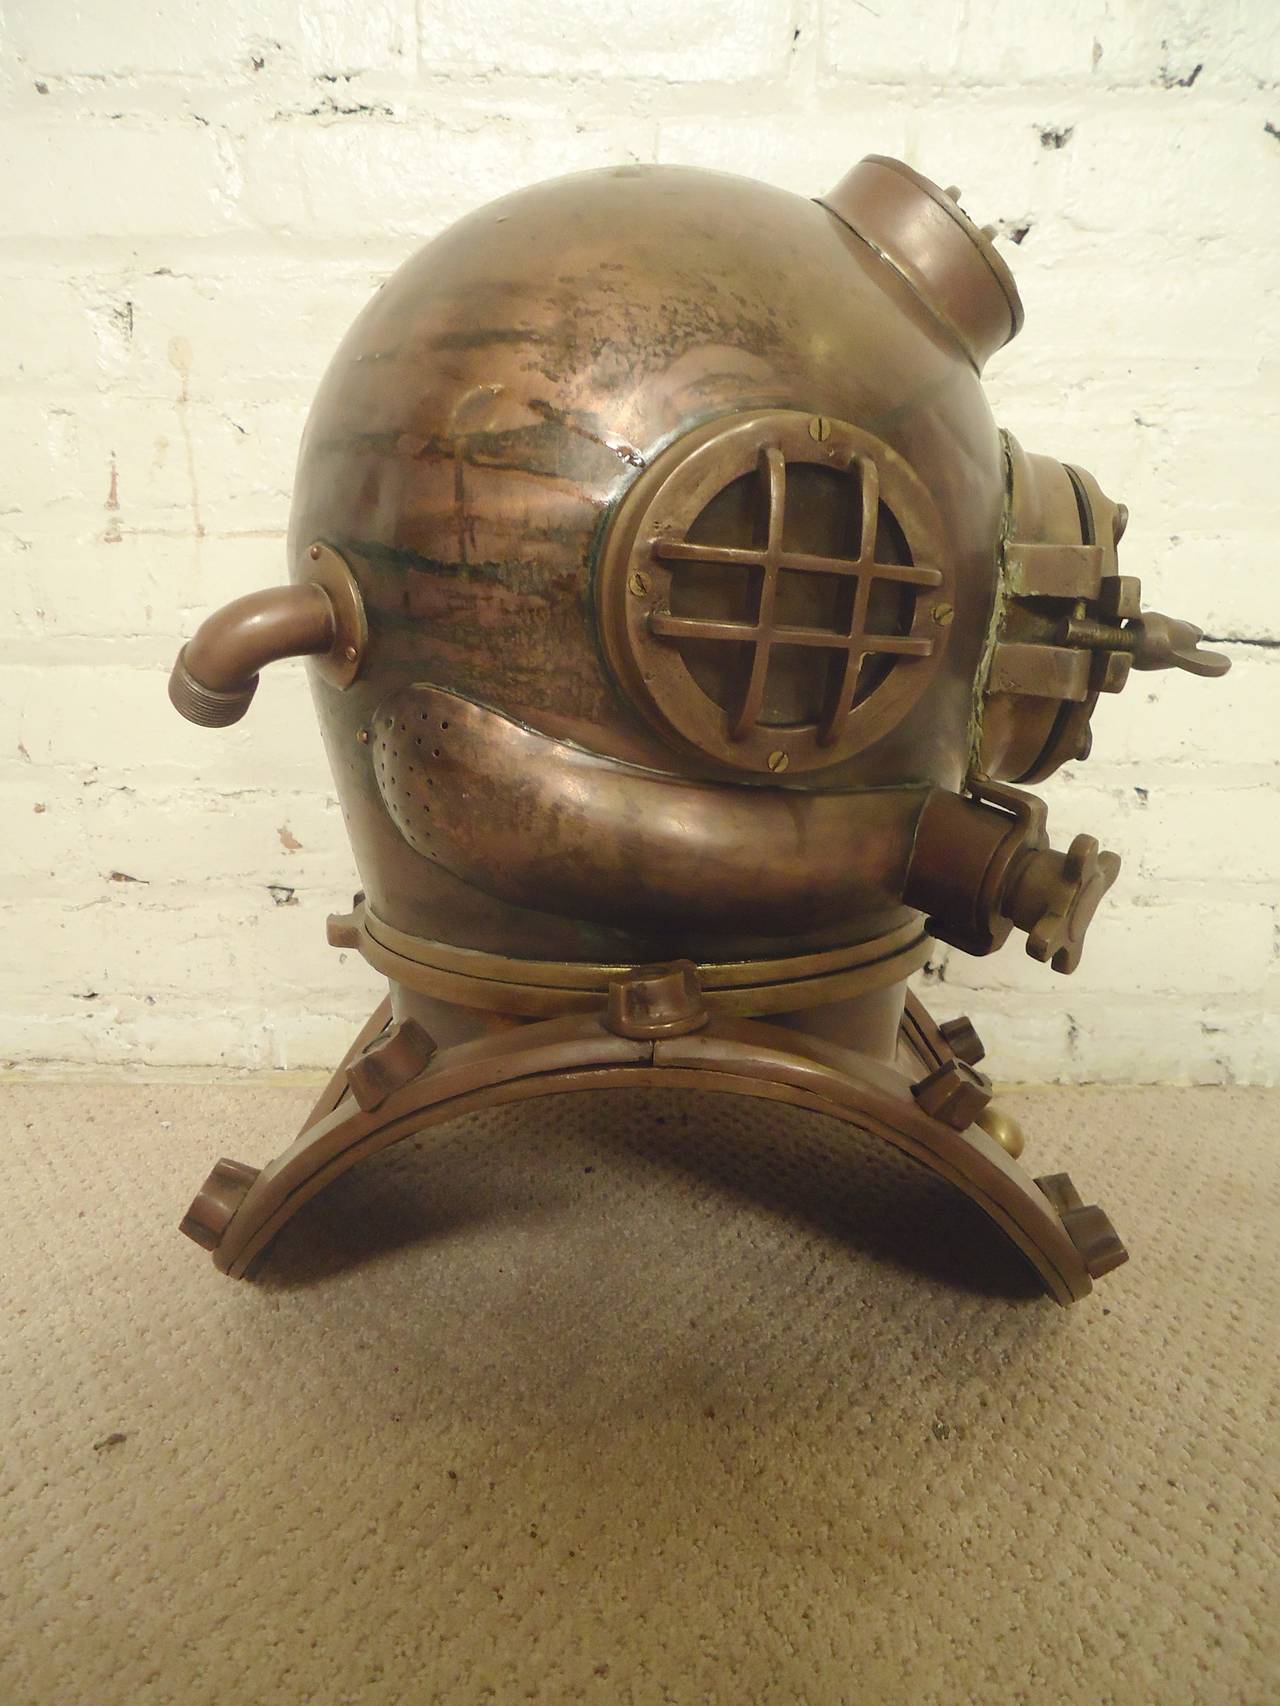 Copper diving helmet from 1941, made in Boston Massachusetts. Very heavy, solid decorative piece.

(Please confirm item location - NY or NJ - with dealer).